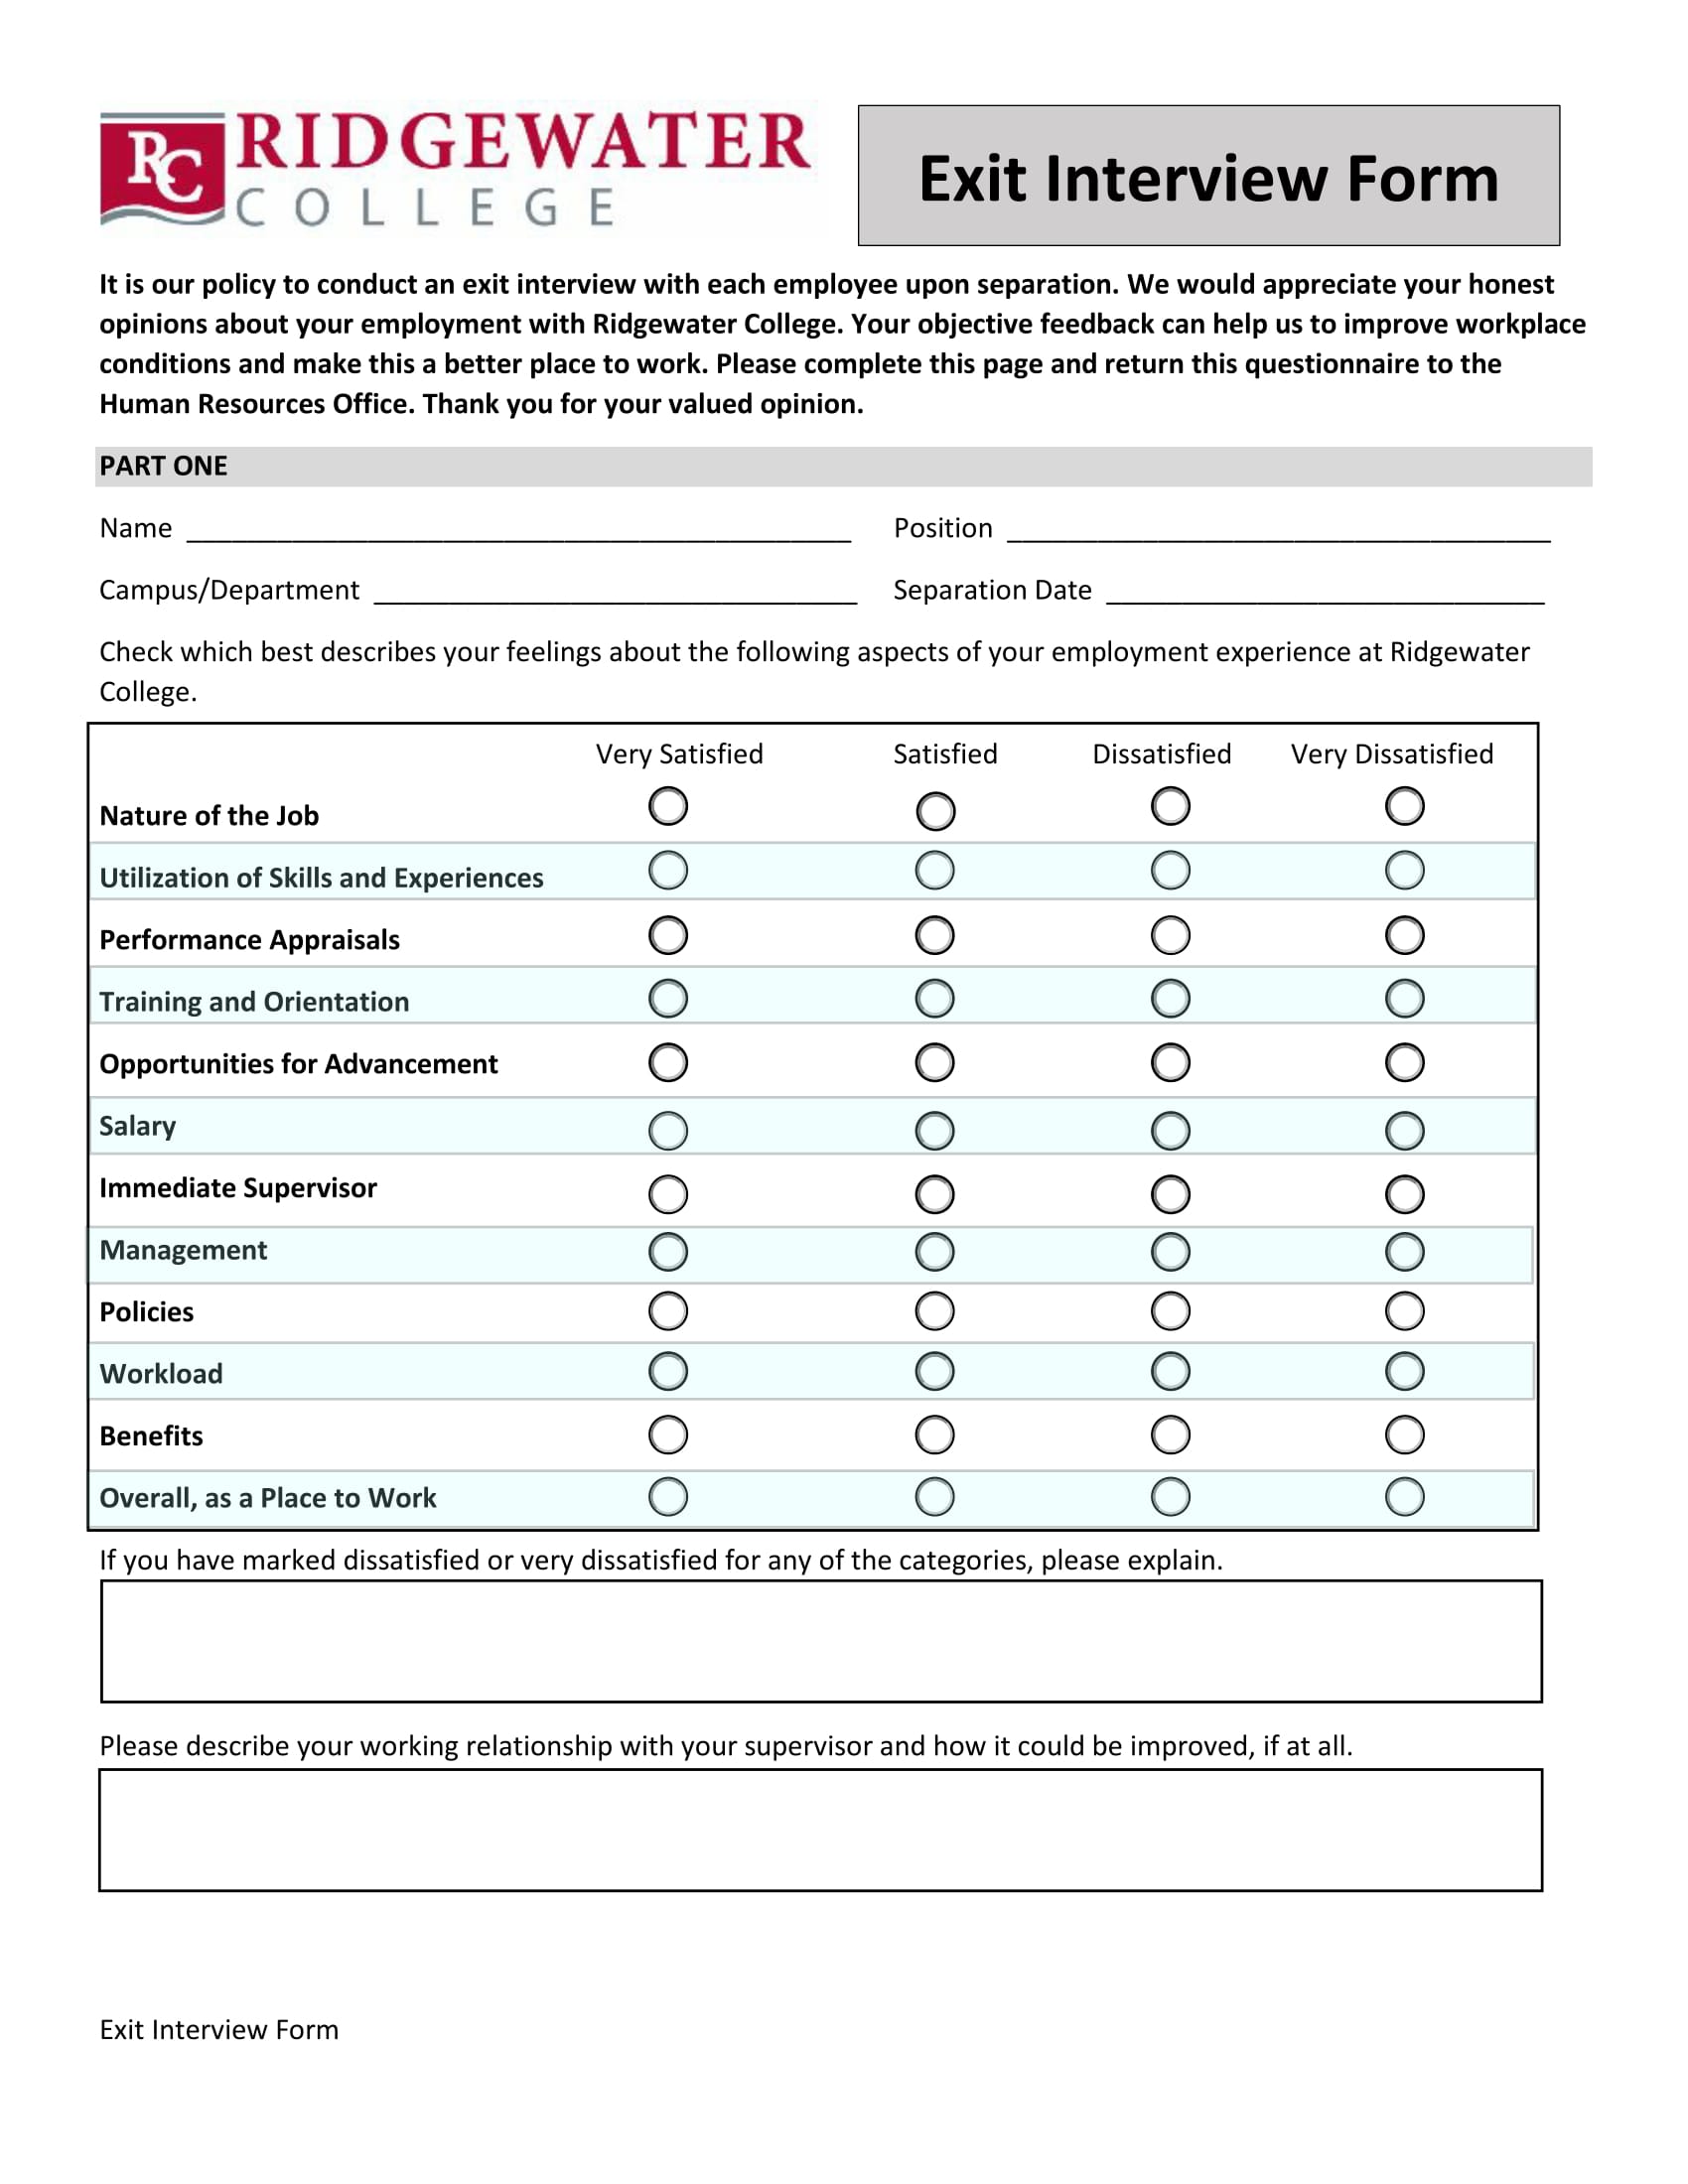 college employee exit interview form 1